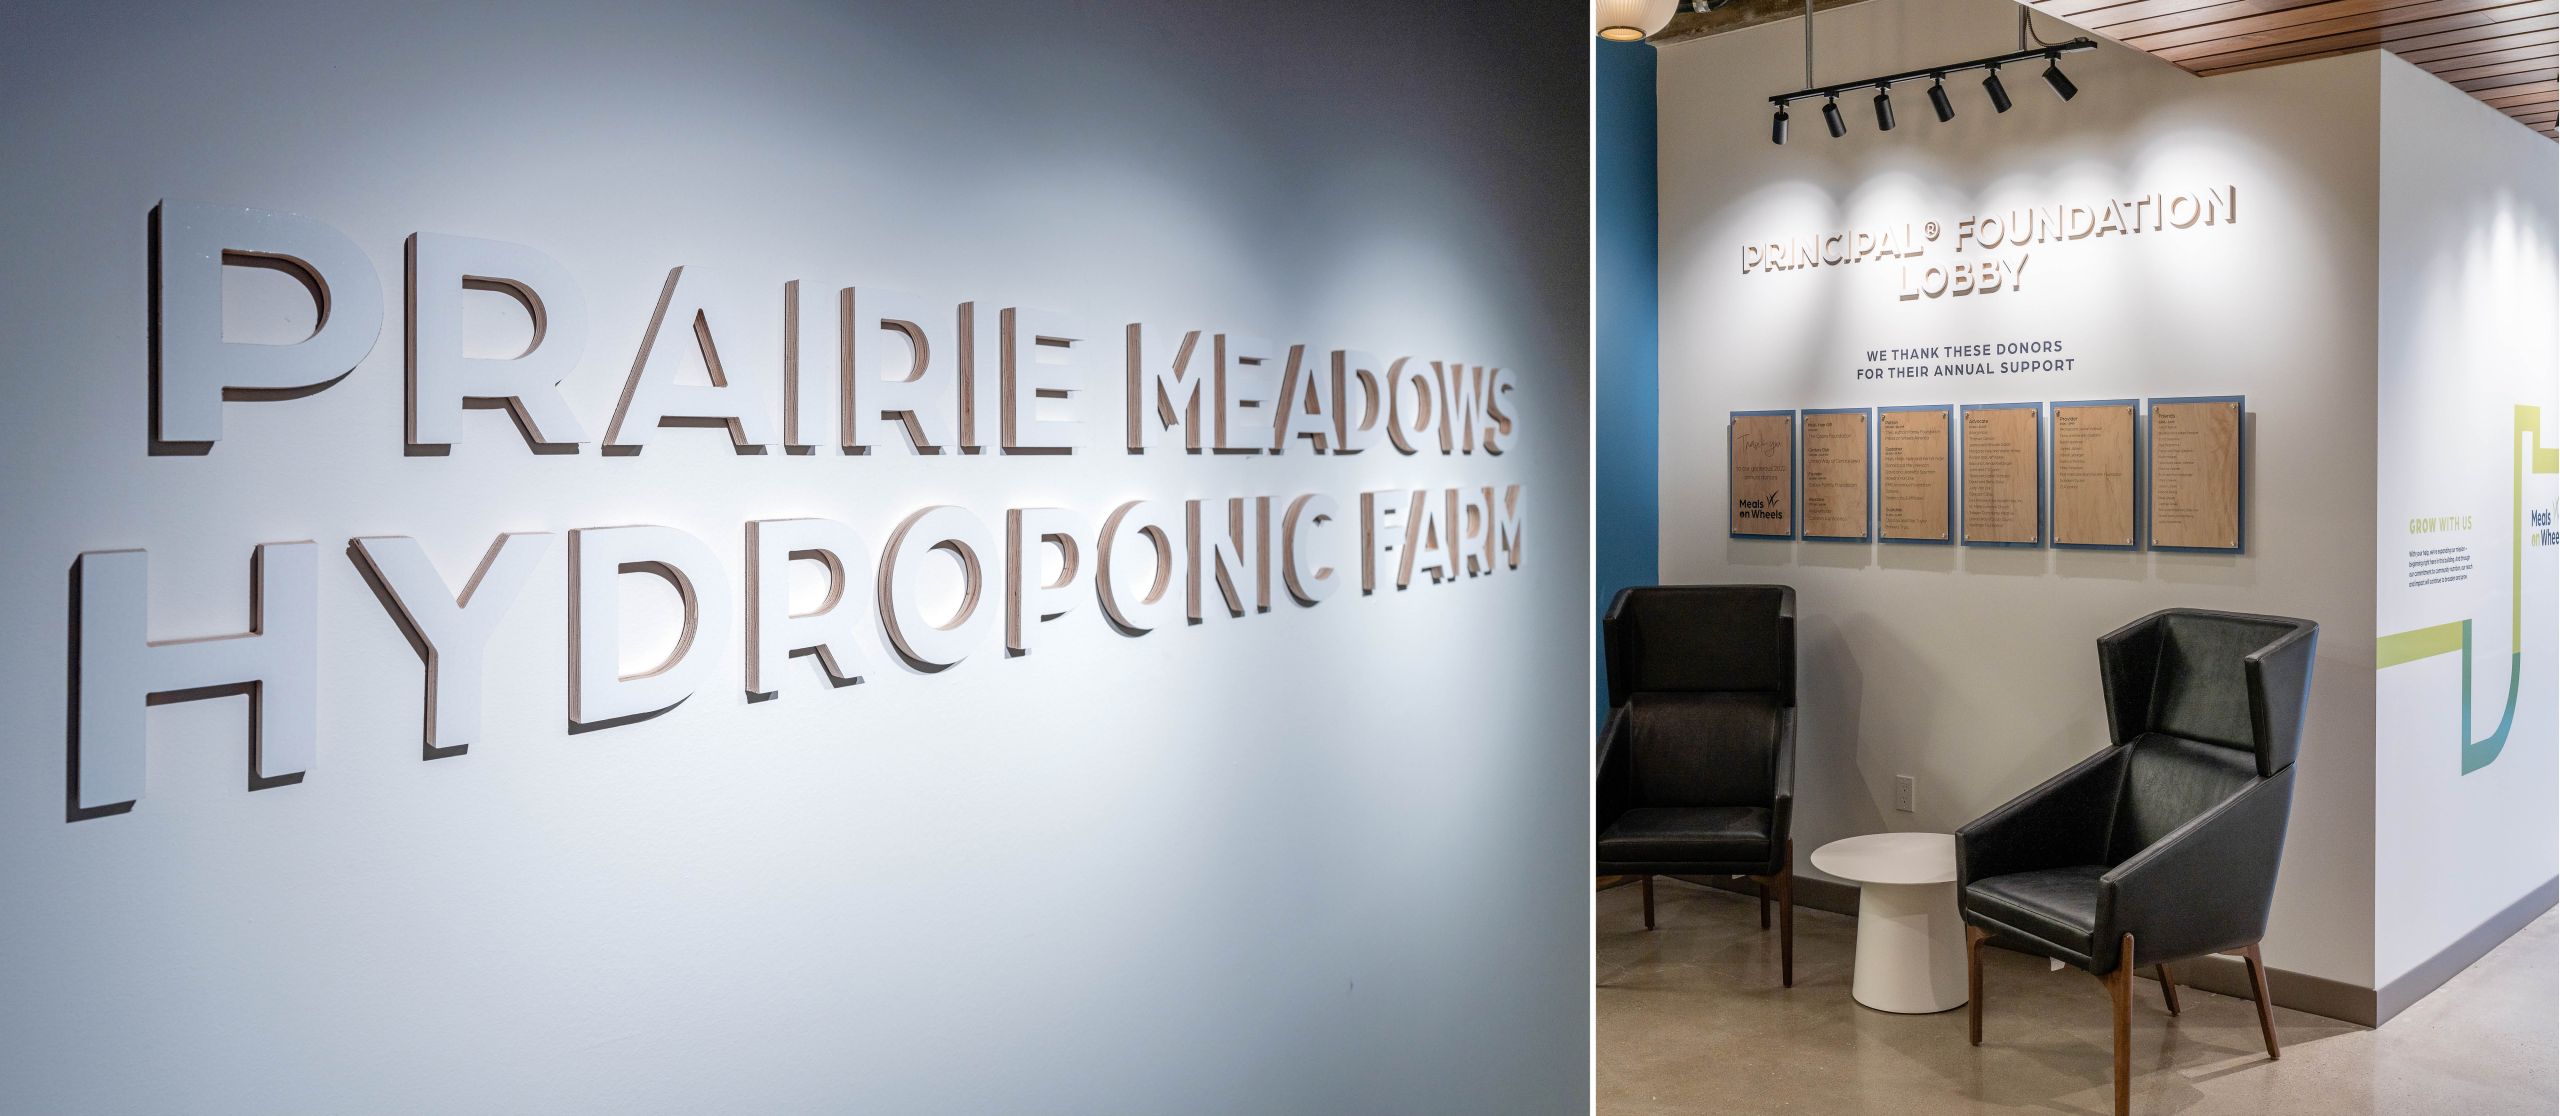 PRAIRIE MEADOWS HYDROPONIC FARM donor recognition on the walls of the WesleLife Meals o Wheels Campus